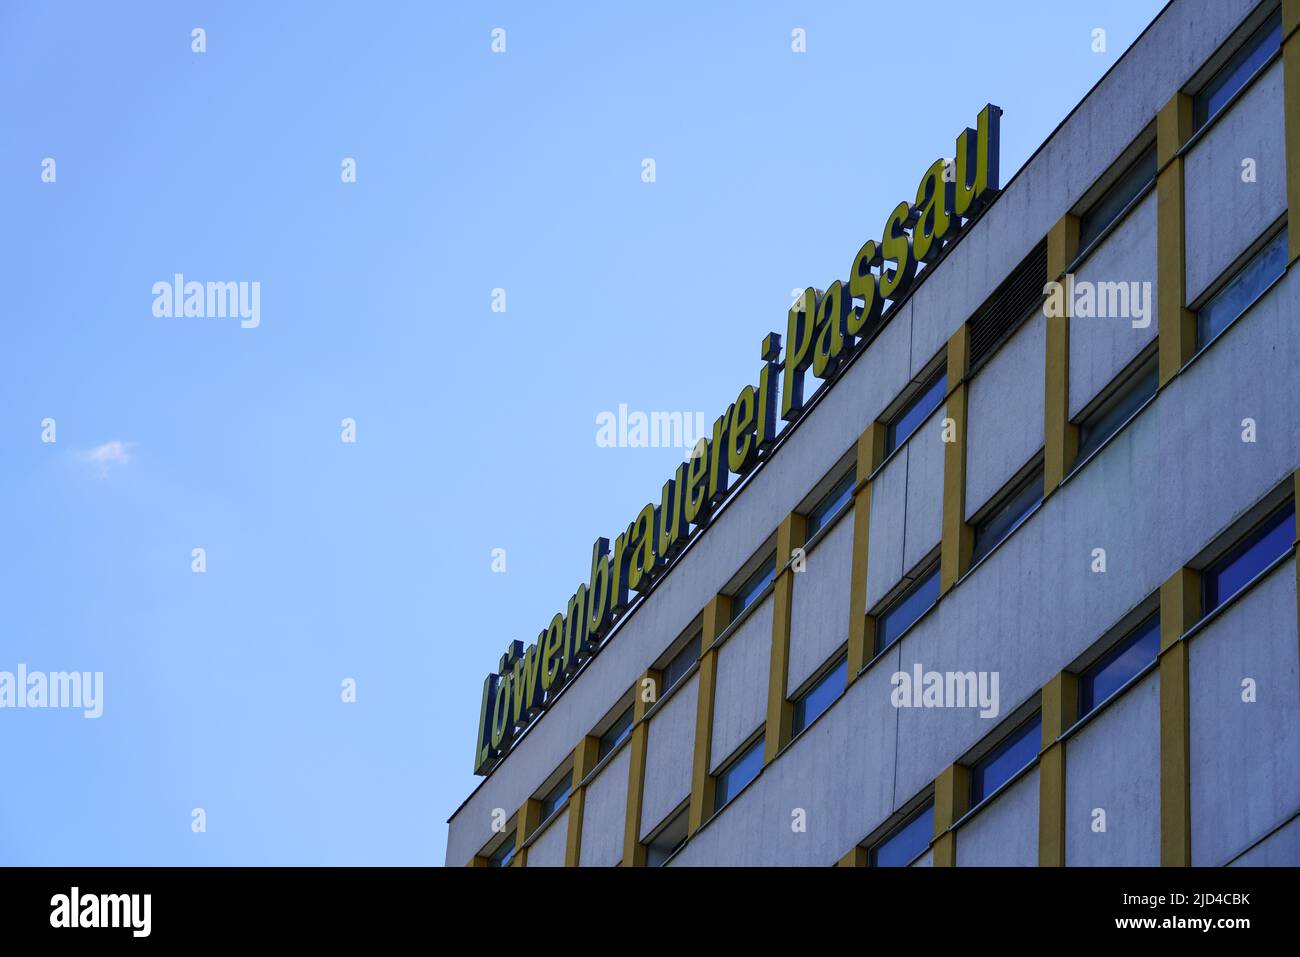 Large name roof sign of the Löwenbrauerei, a German beer brewery located in Passau, Bavaria, Germany, 11.6.22 Stock Photo